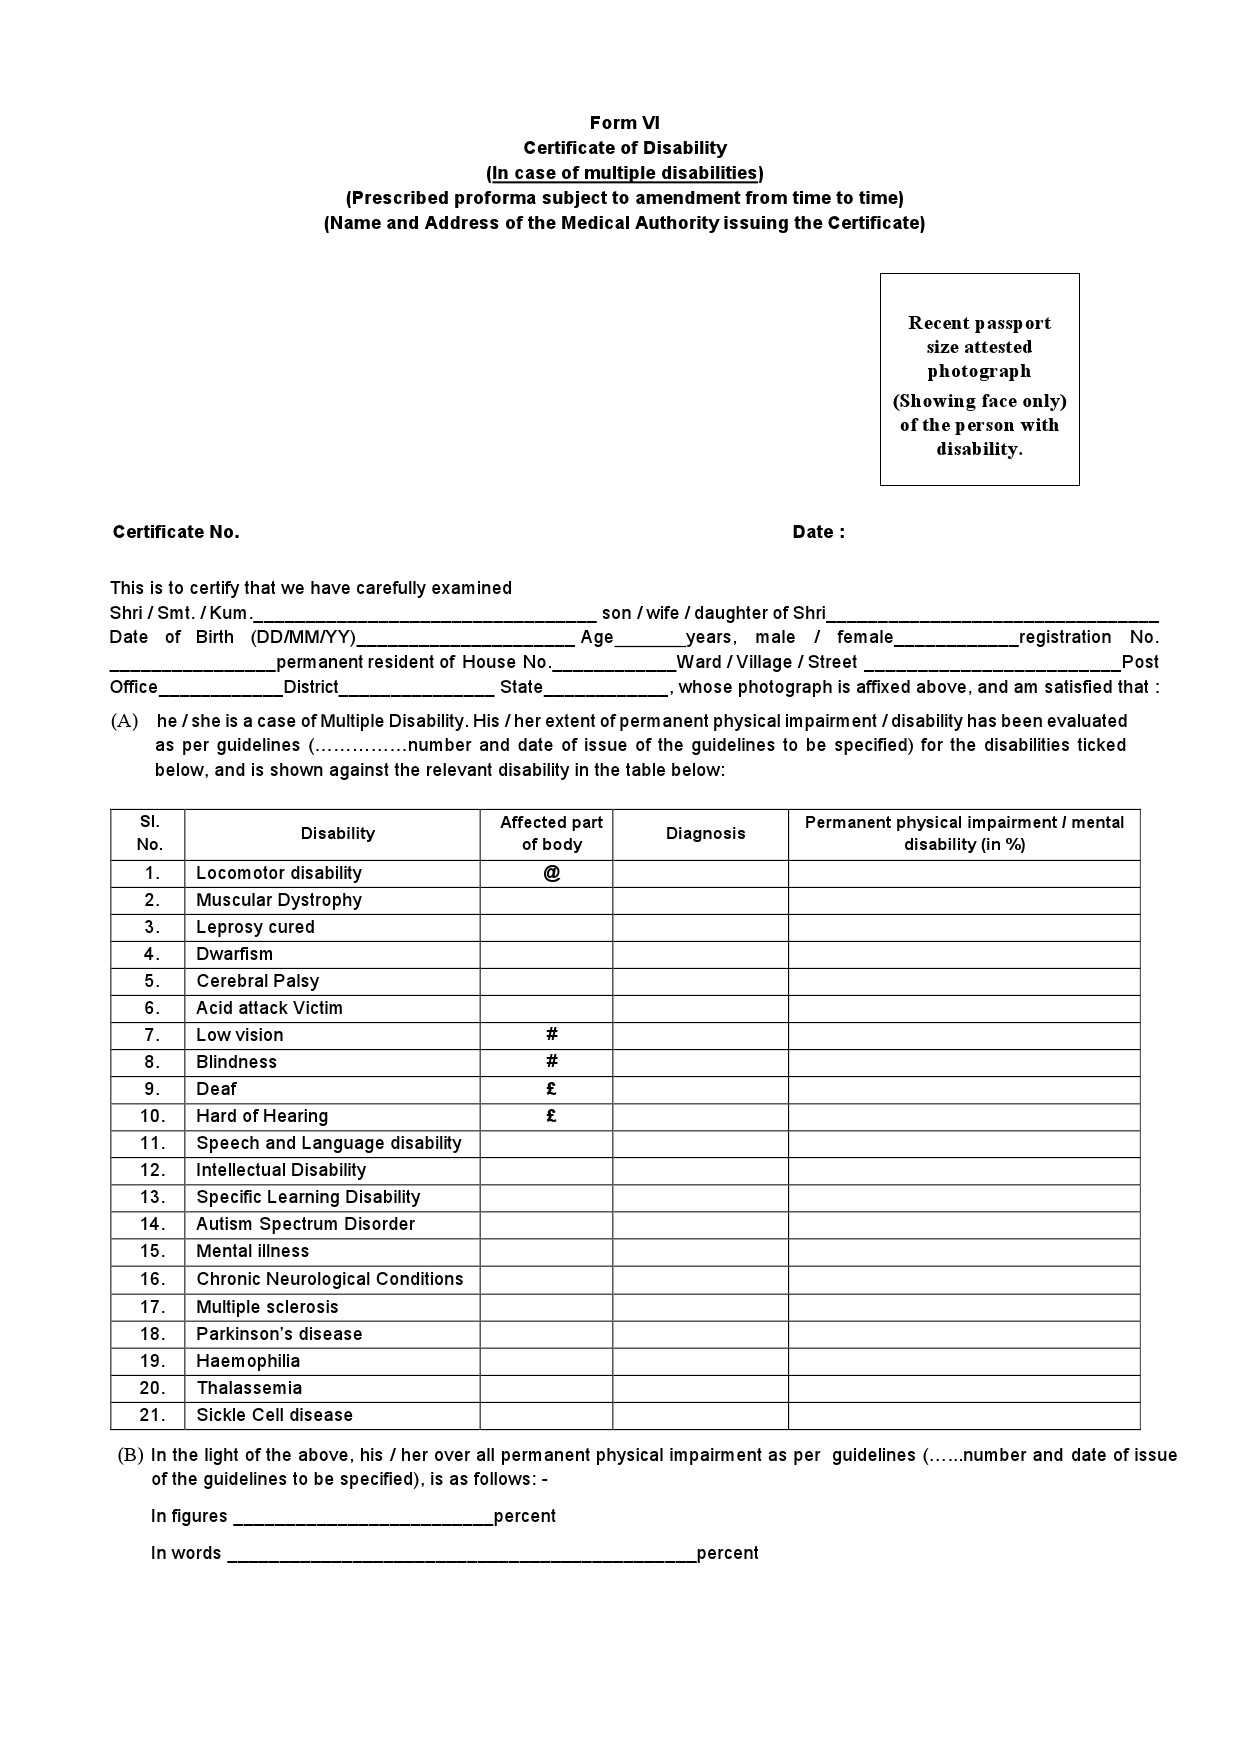 Class III Assistants in New India Assurance Company - Notification Image 22